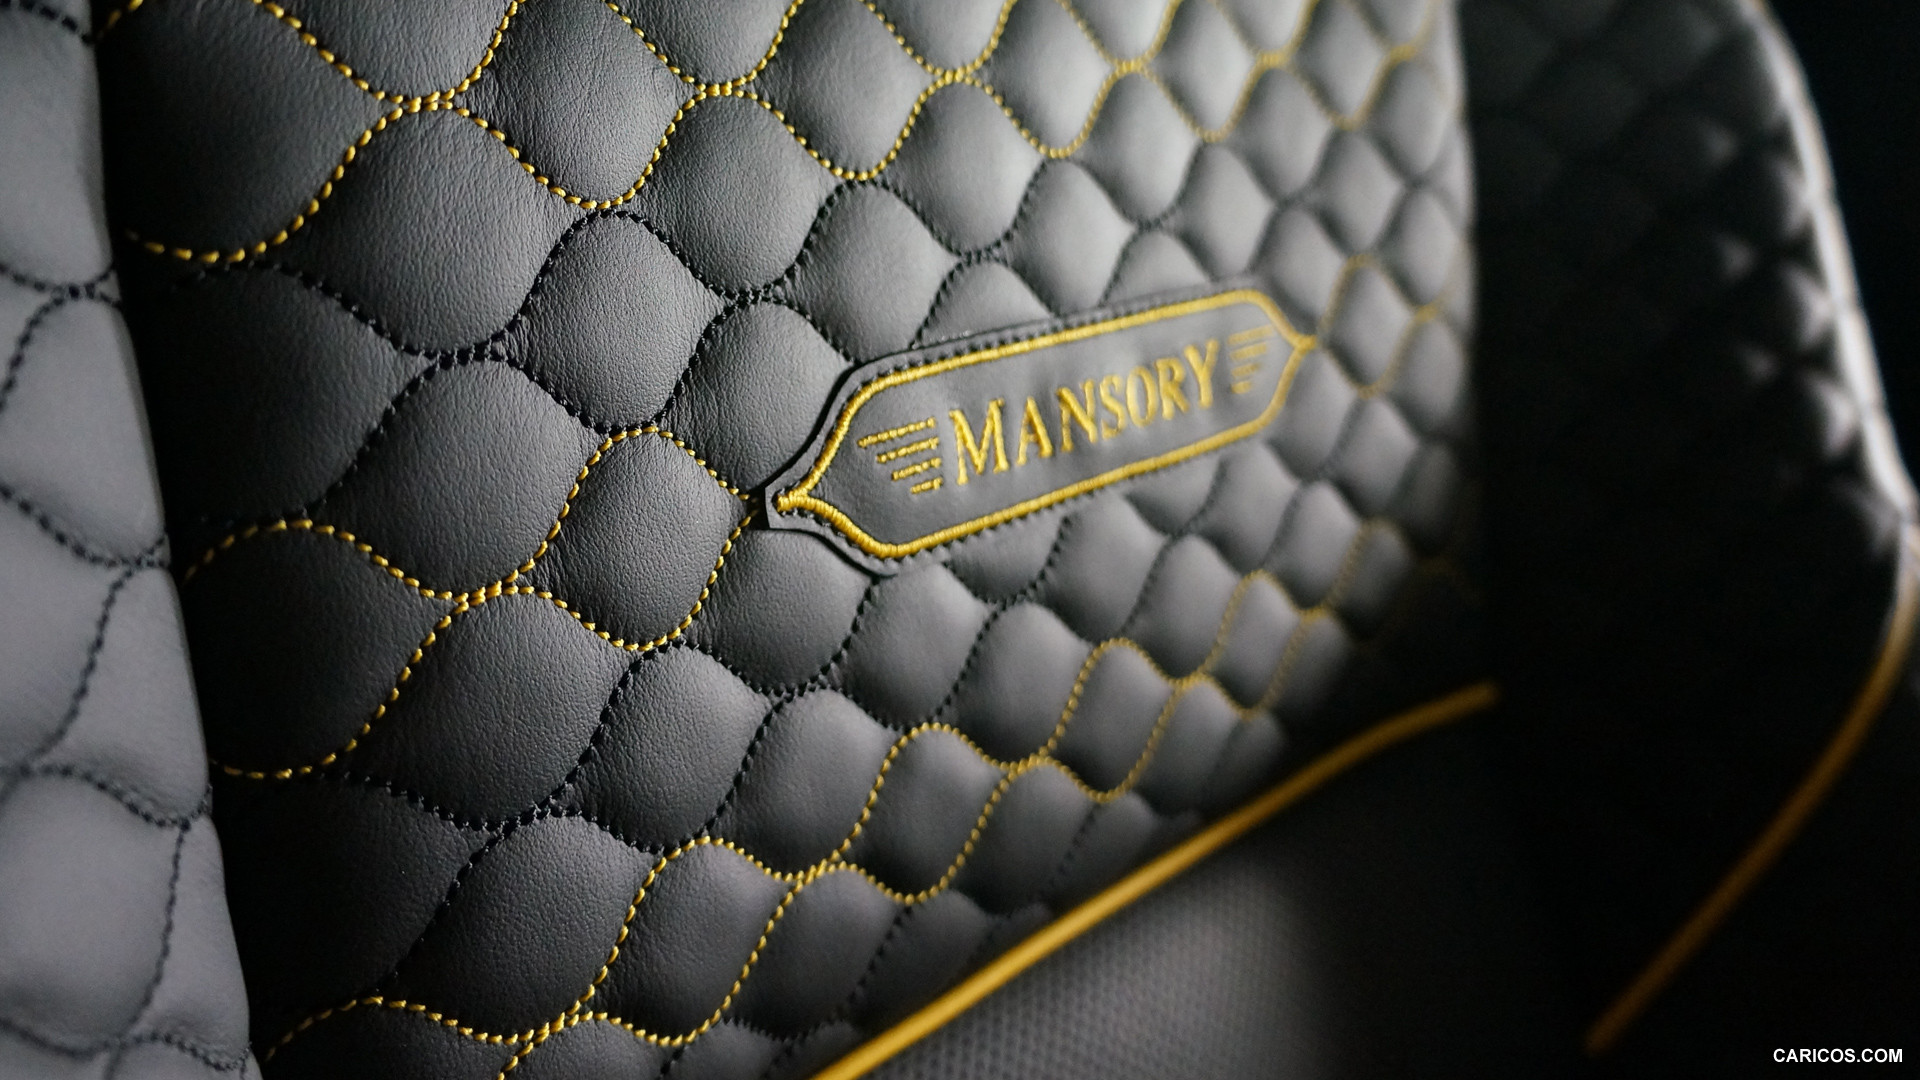 2013 Mansory Gronos based on Mercedes-Benz G-Class AMG  - Interior Detail, #7 of 7